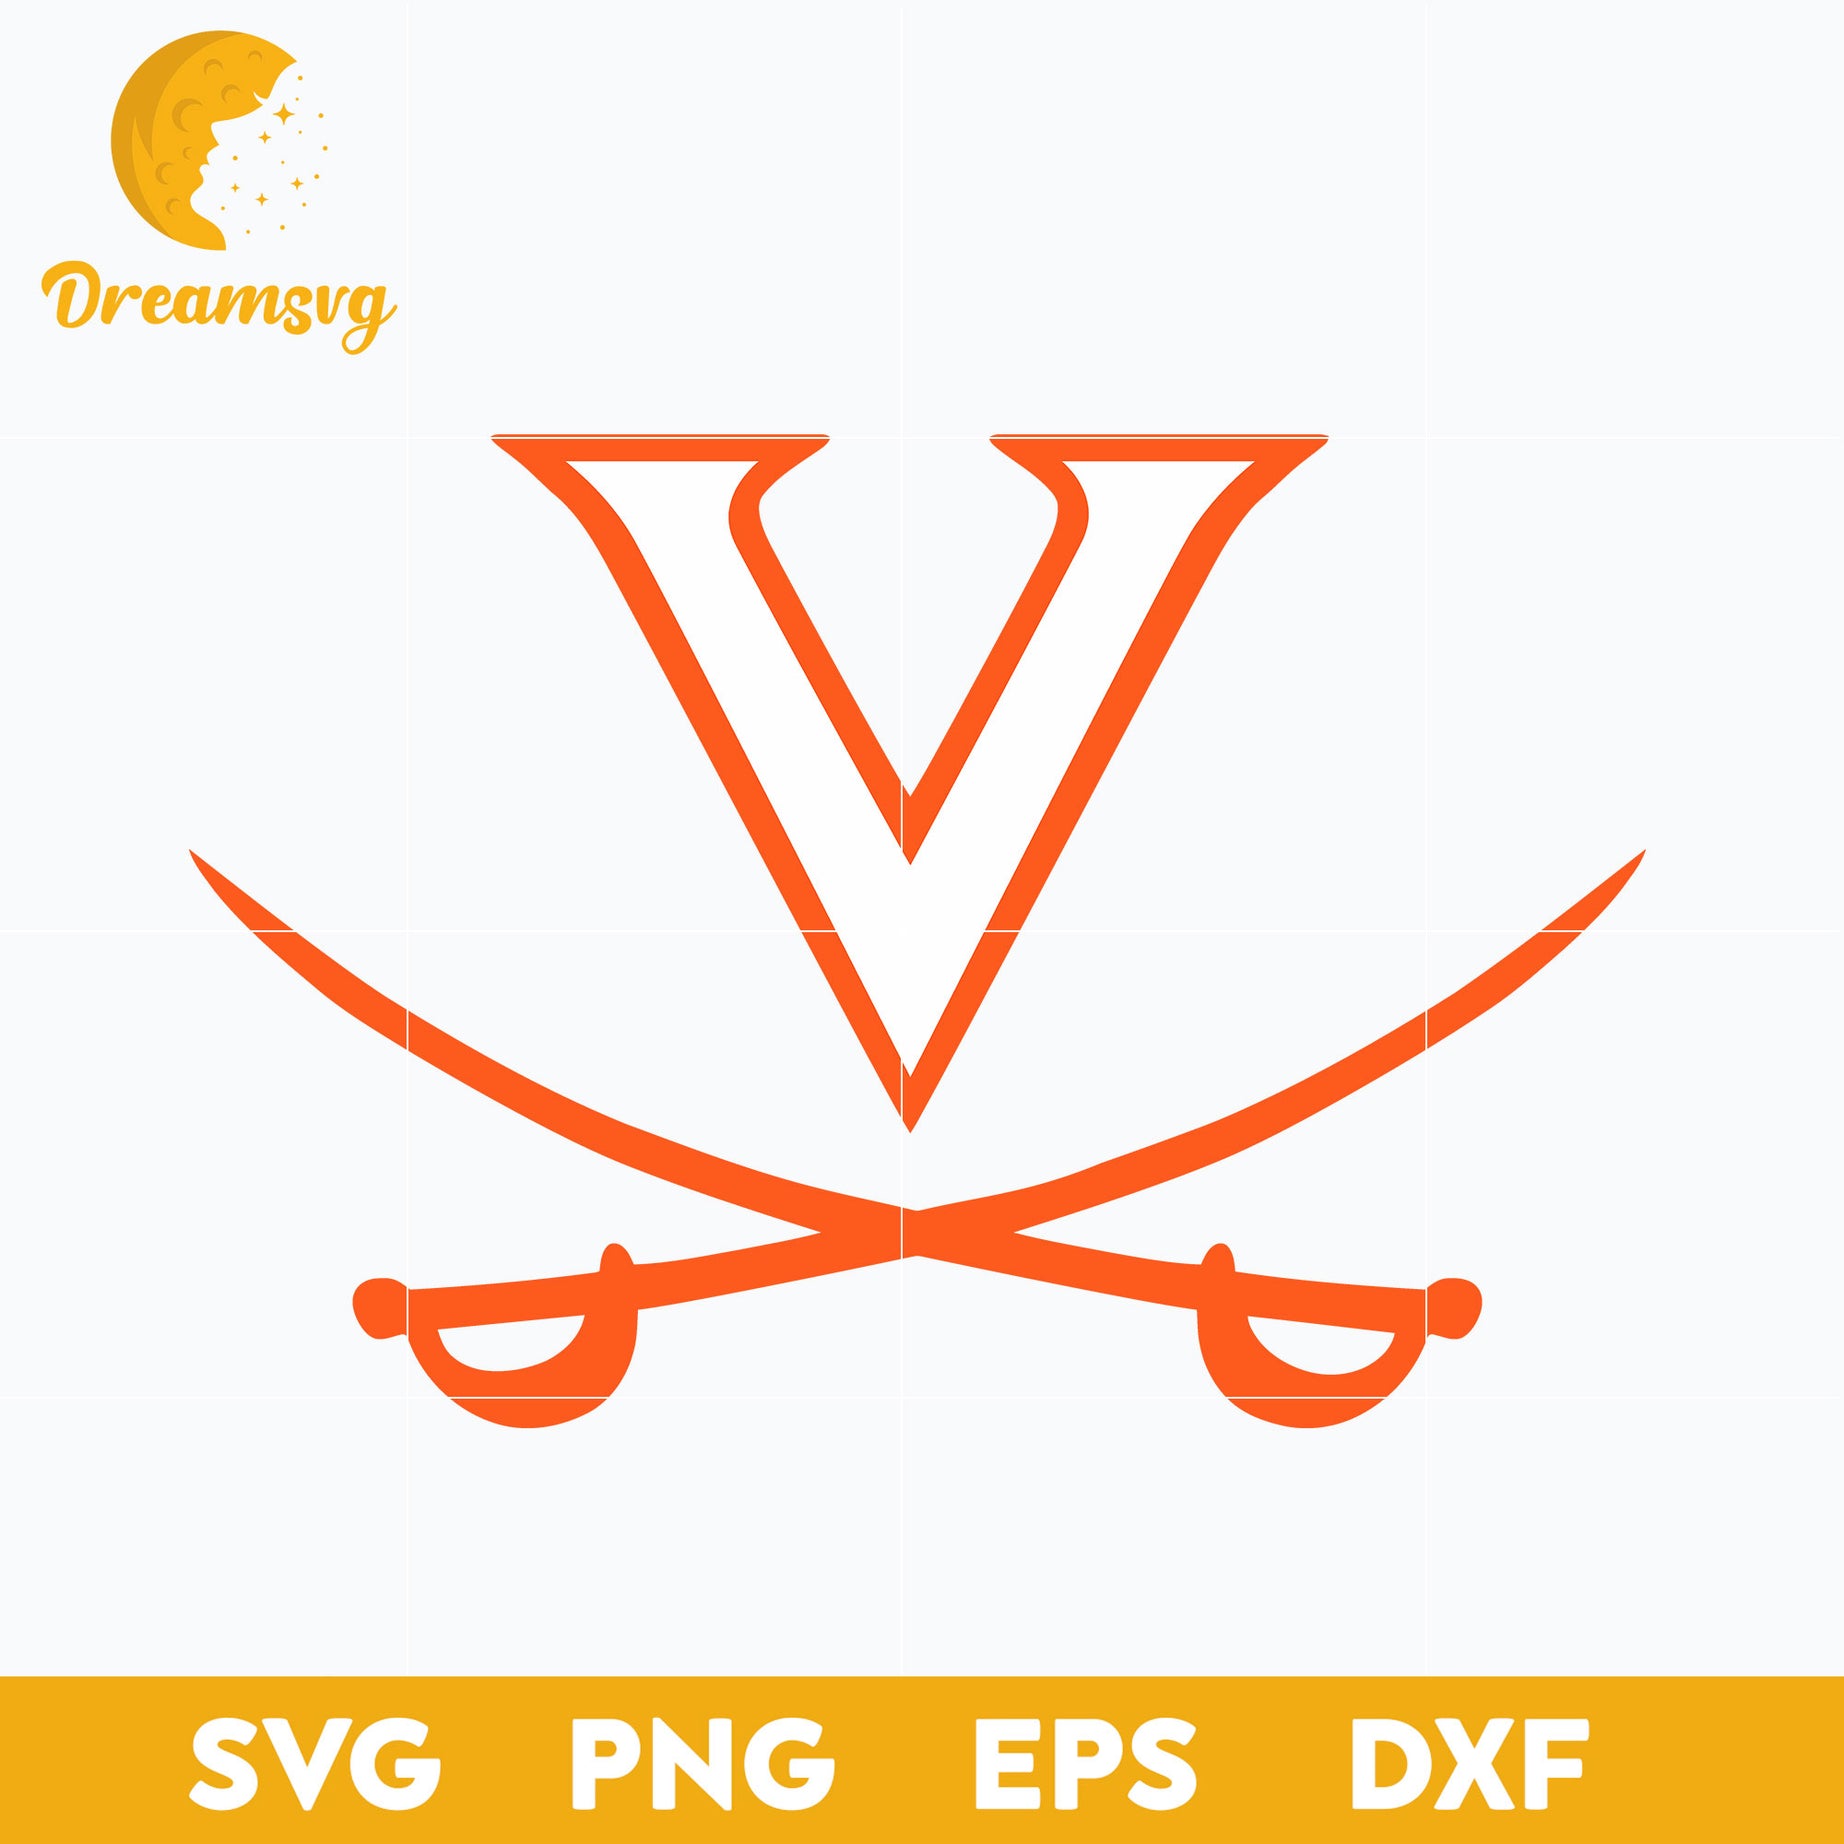 Virginia Cavaliers Svg, Logo Ncaa Sport Svg, Ncaa Svg, Png, Dxf, Eps Download File.